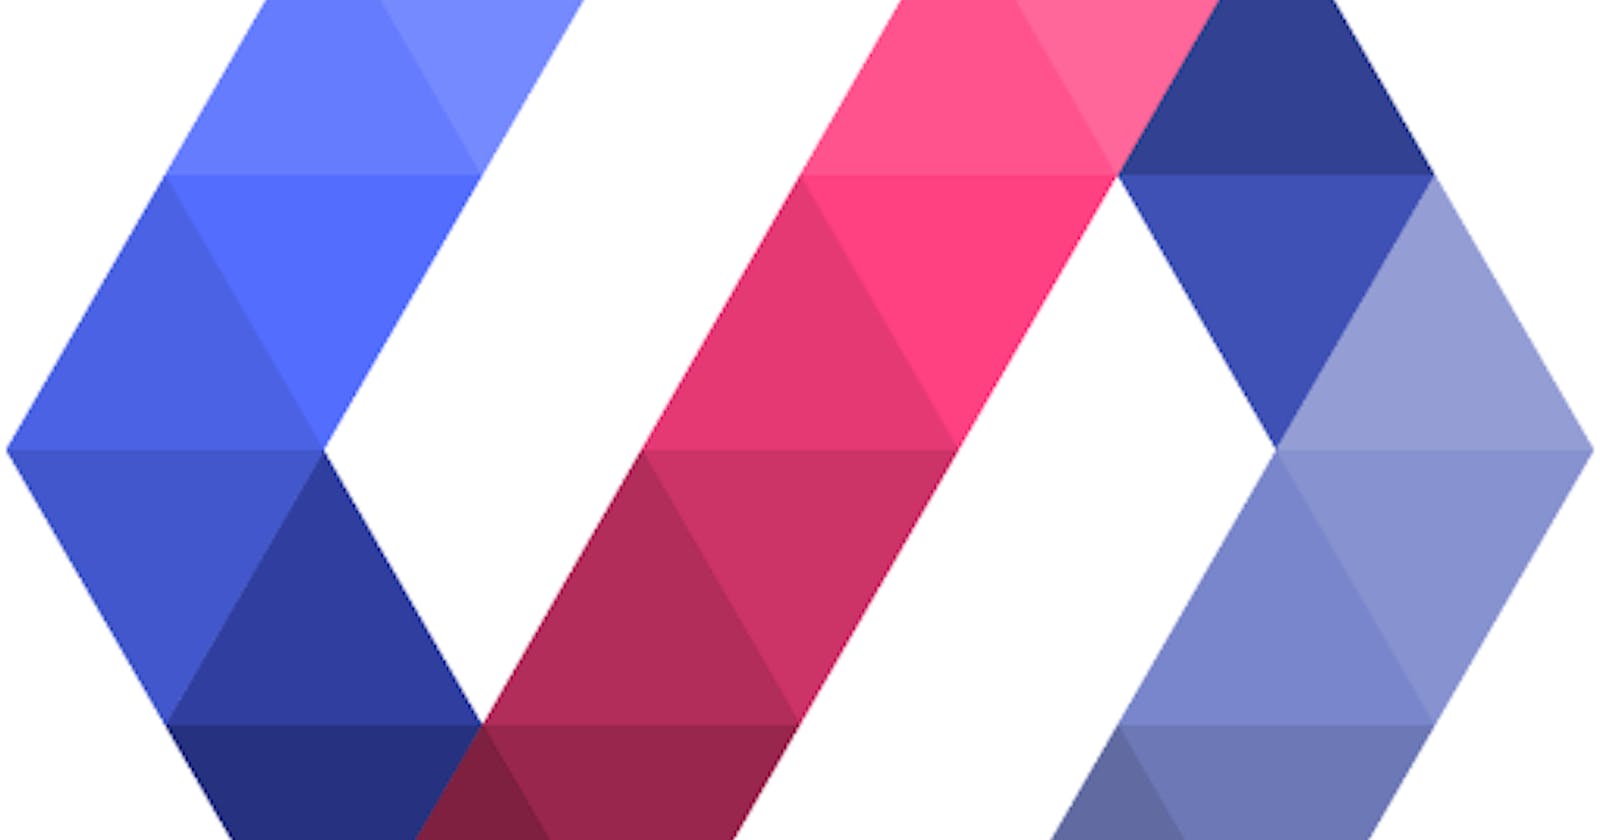 Polymer 3 — First Impressions